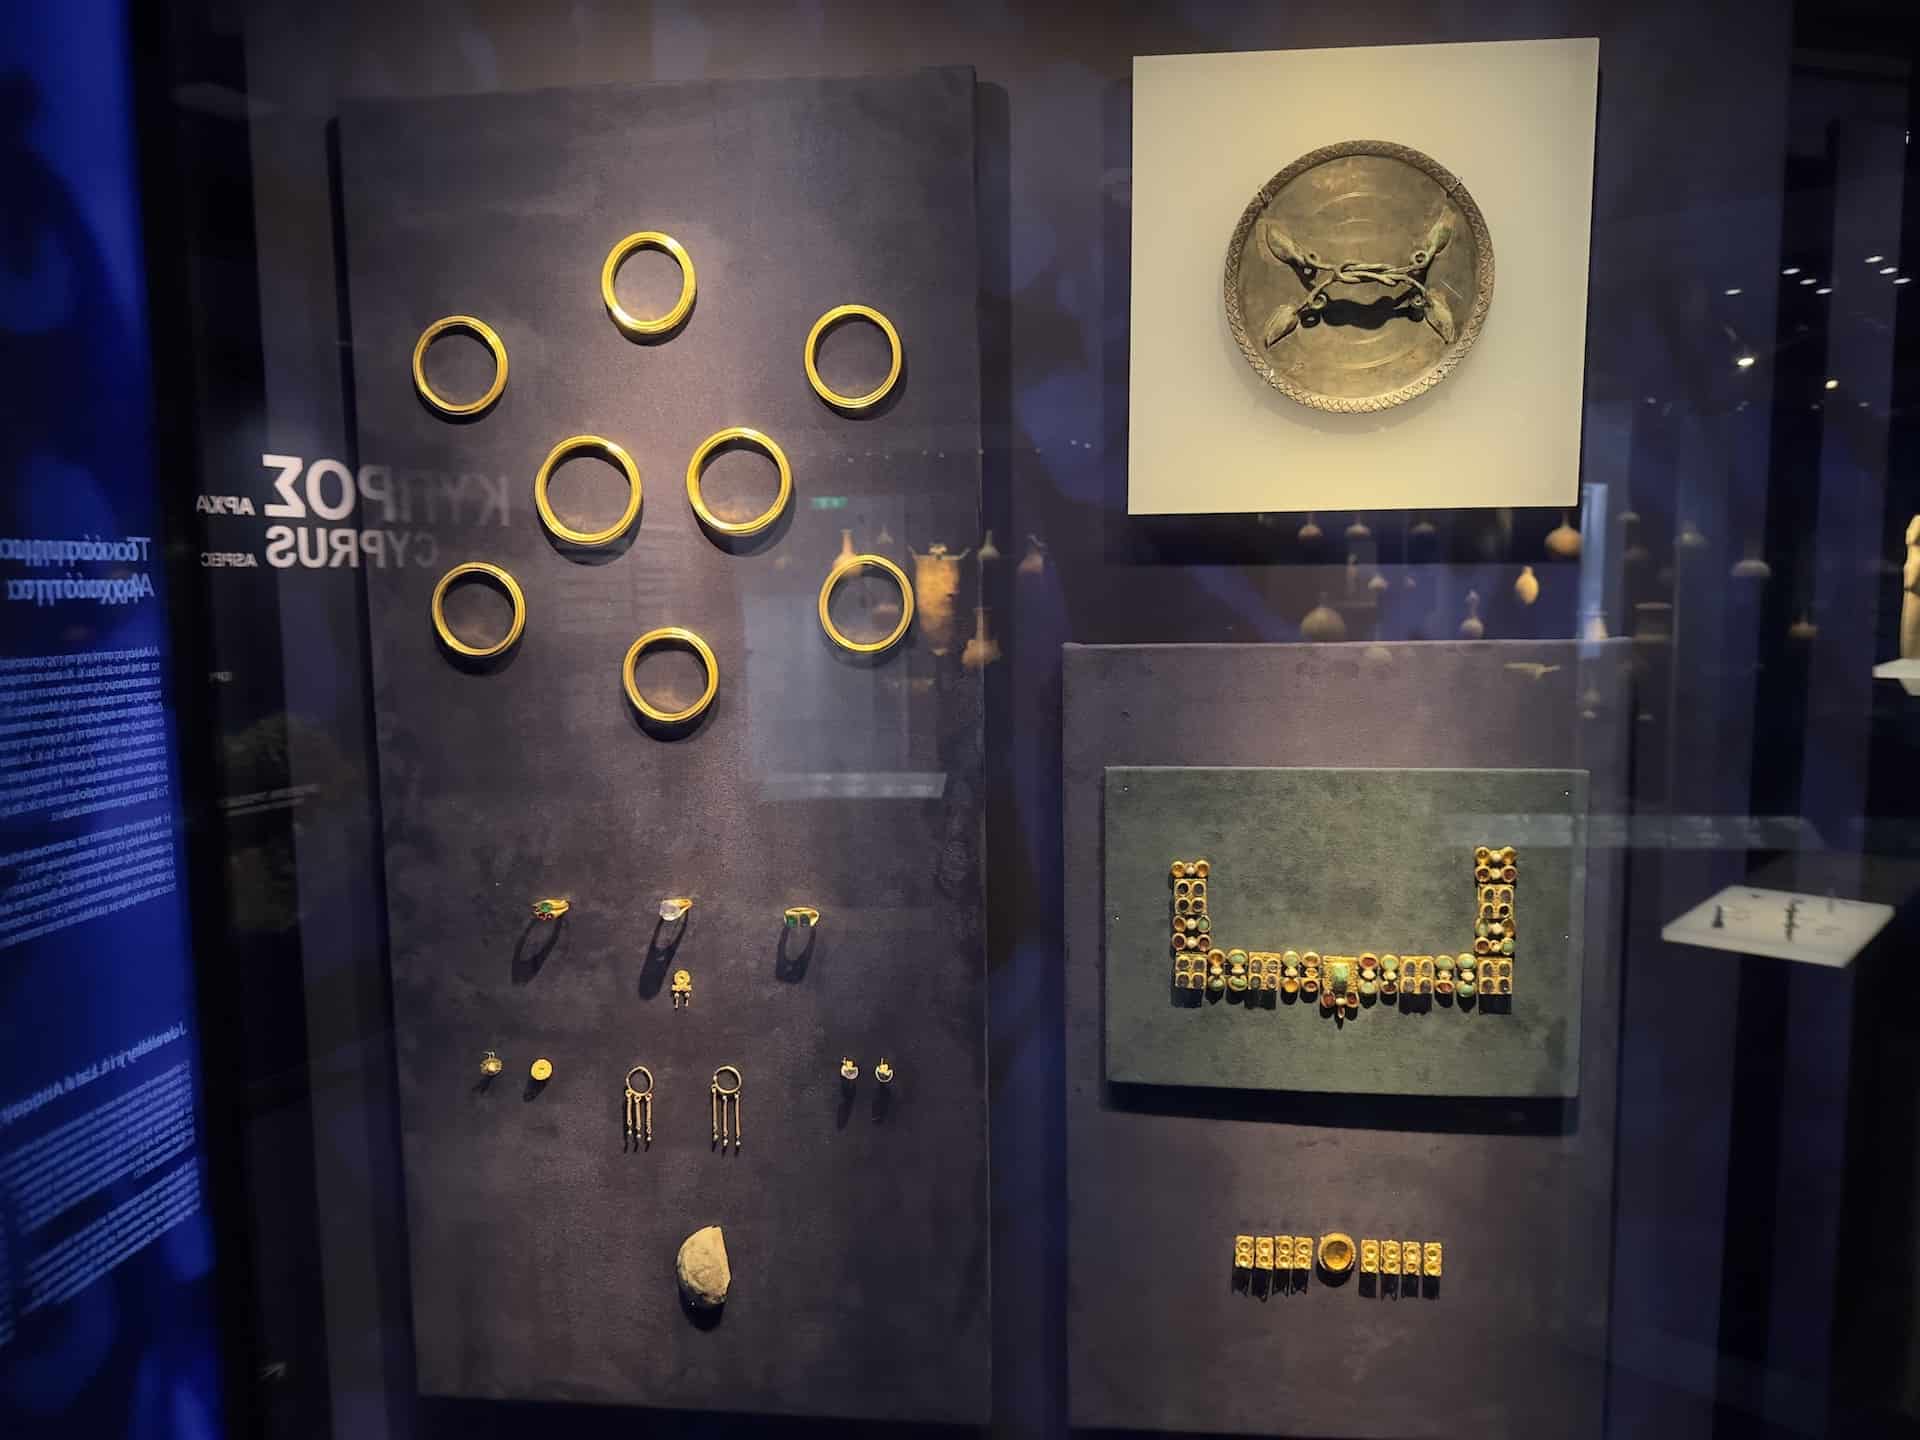 Jewelry in late antiquity in Cypriot Culture at the Museum of Cycladic Art in Athens, Greece